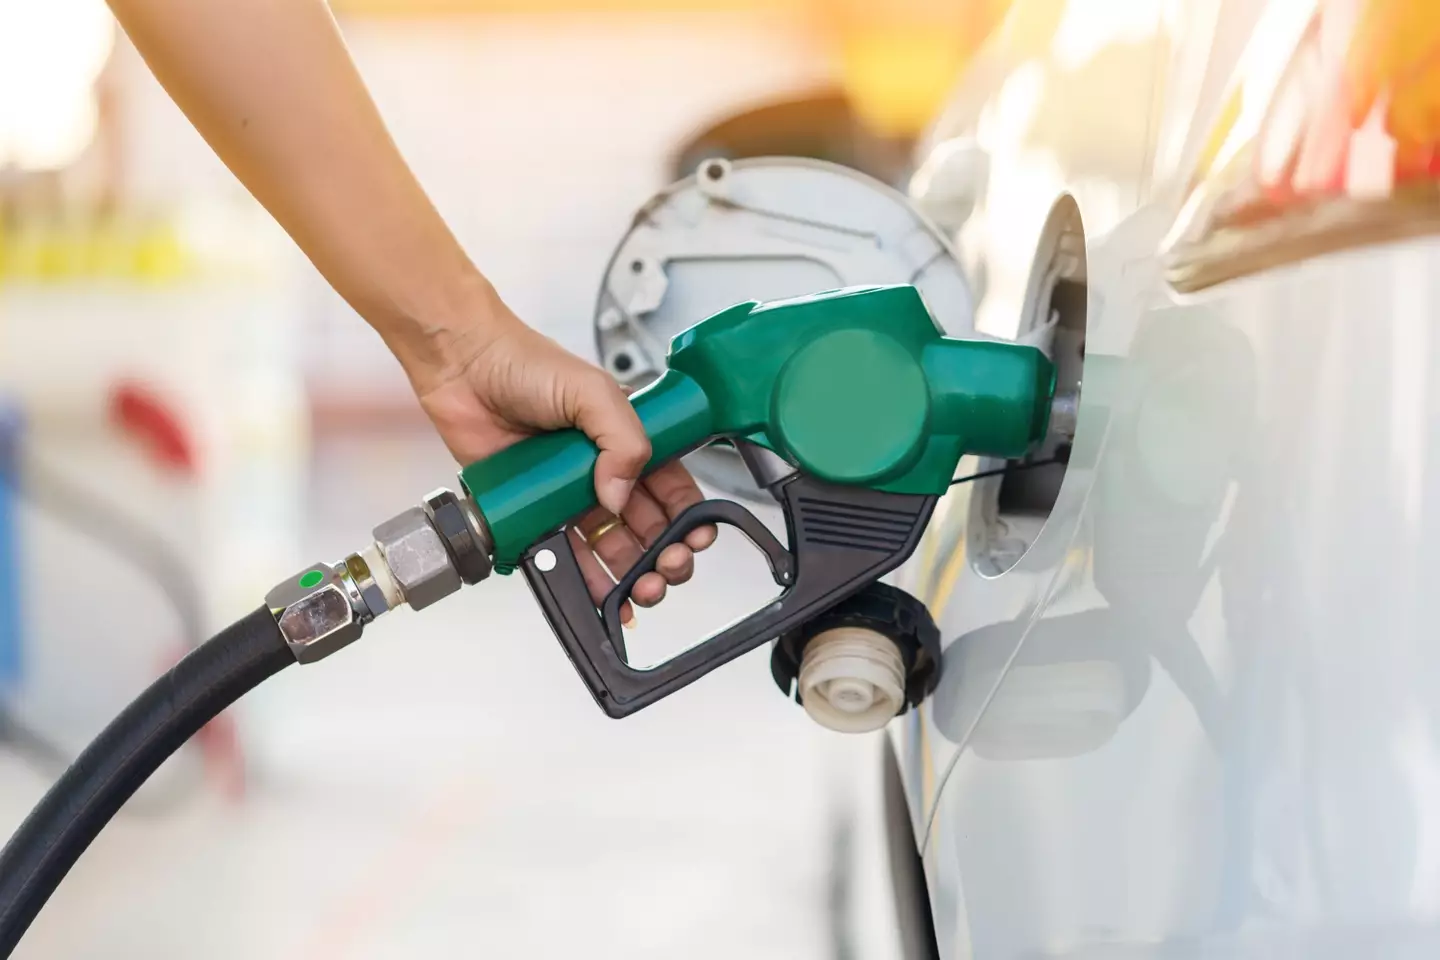 If you filled your car up last week, you'll likely have noticed that fuel prices have rocketed (